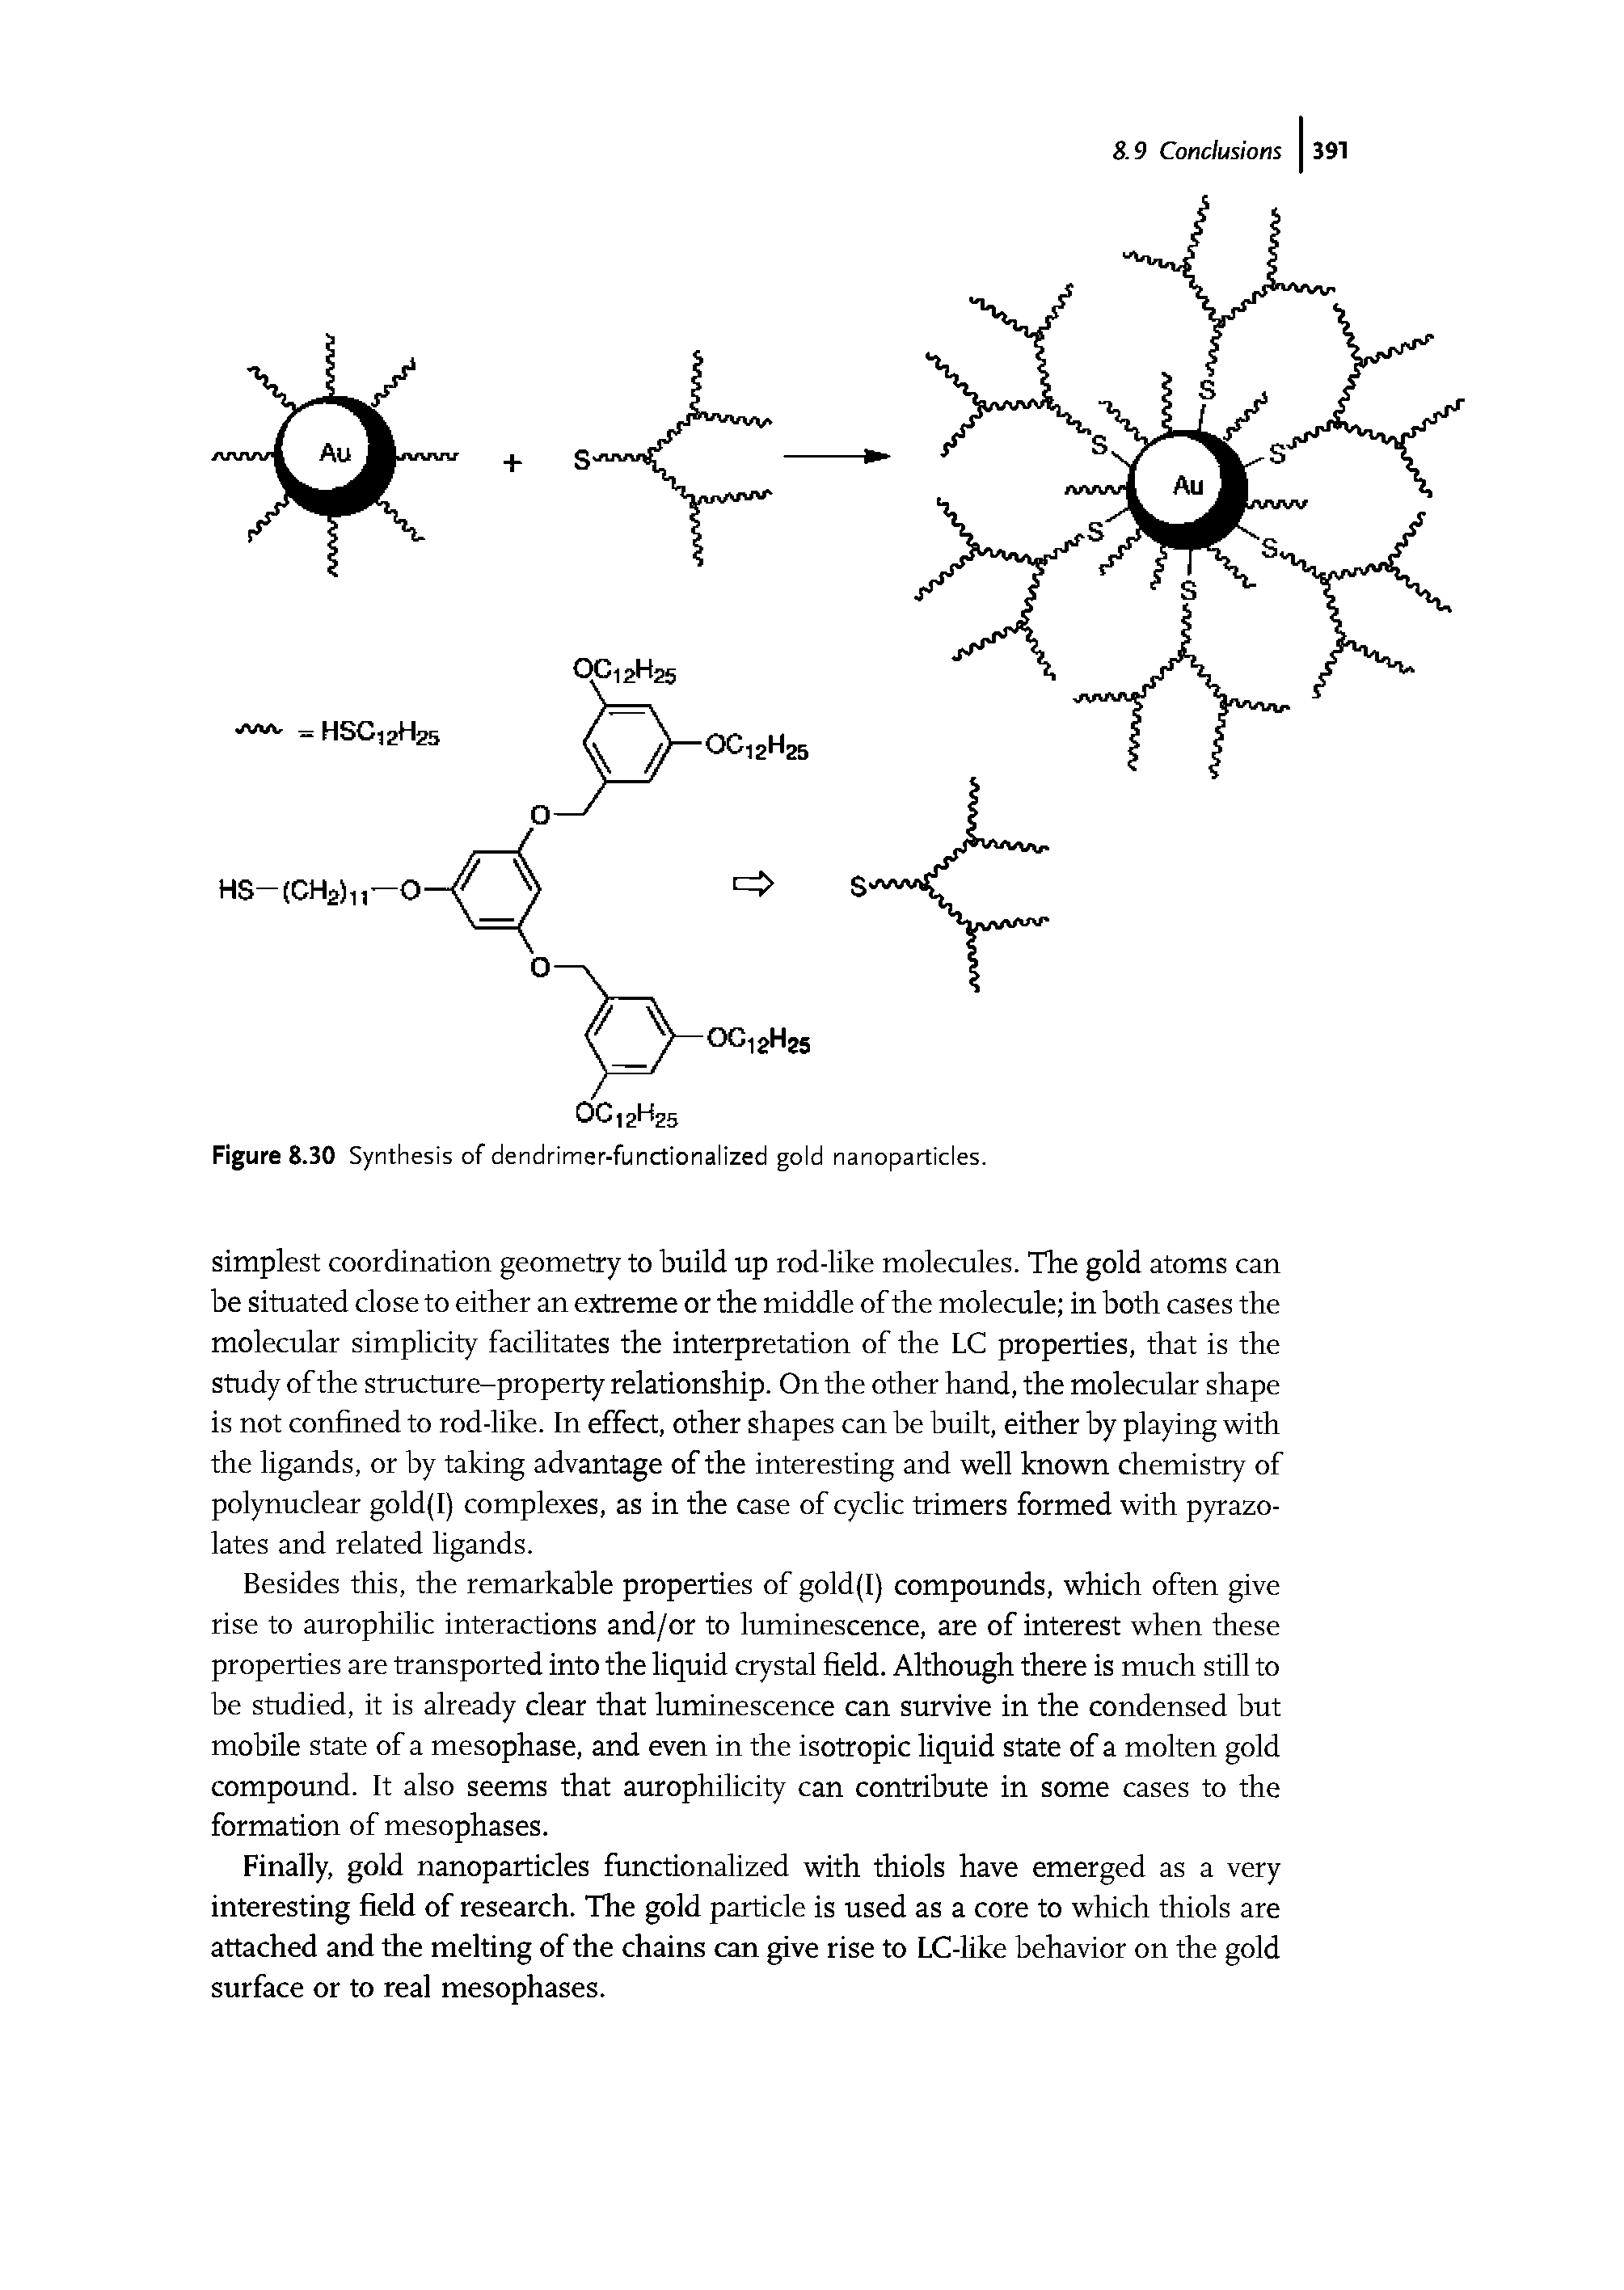 Figure 8.30 Synthesis of dendrimer-functionalized gold nanoparticles.